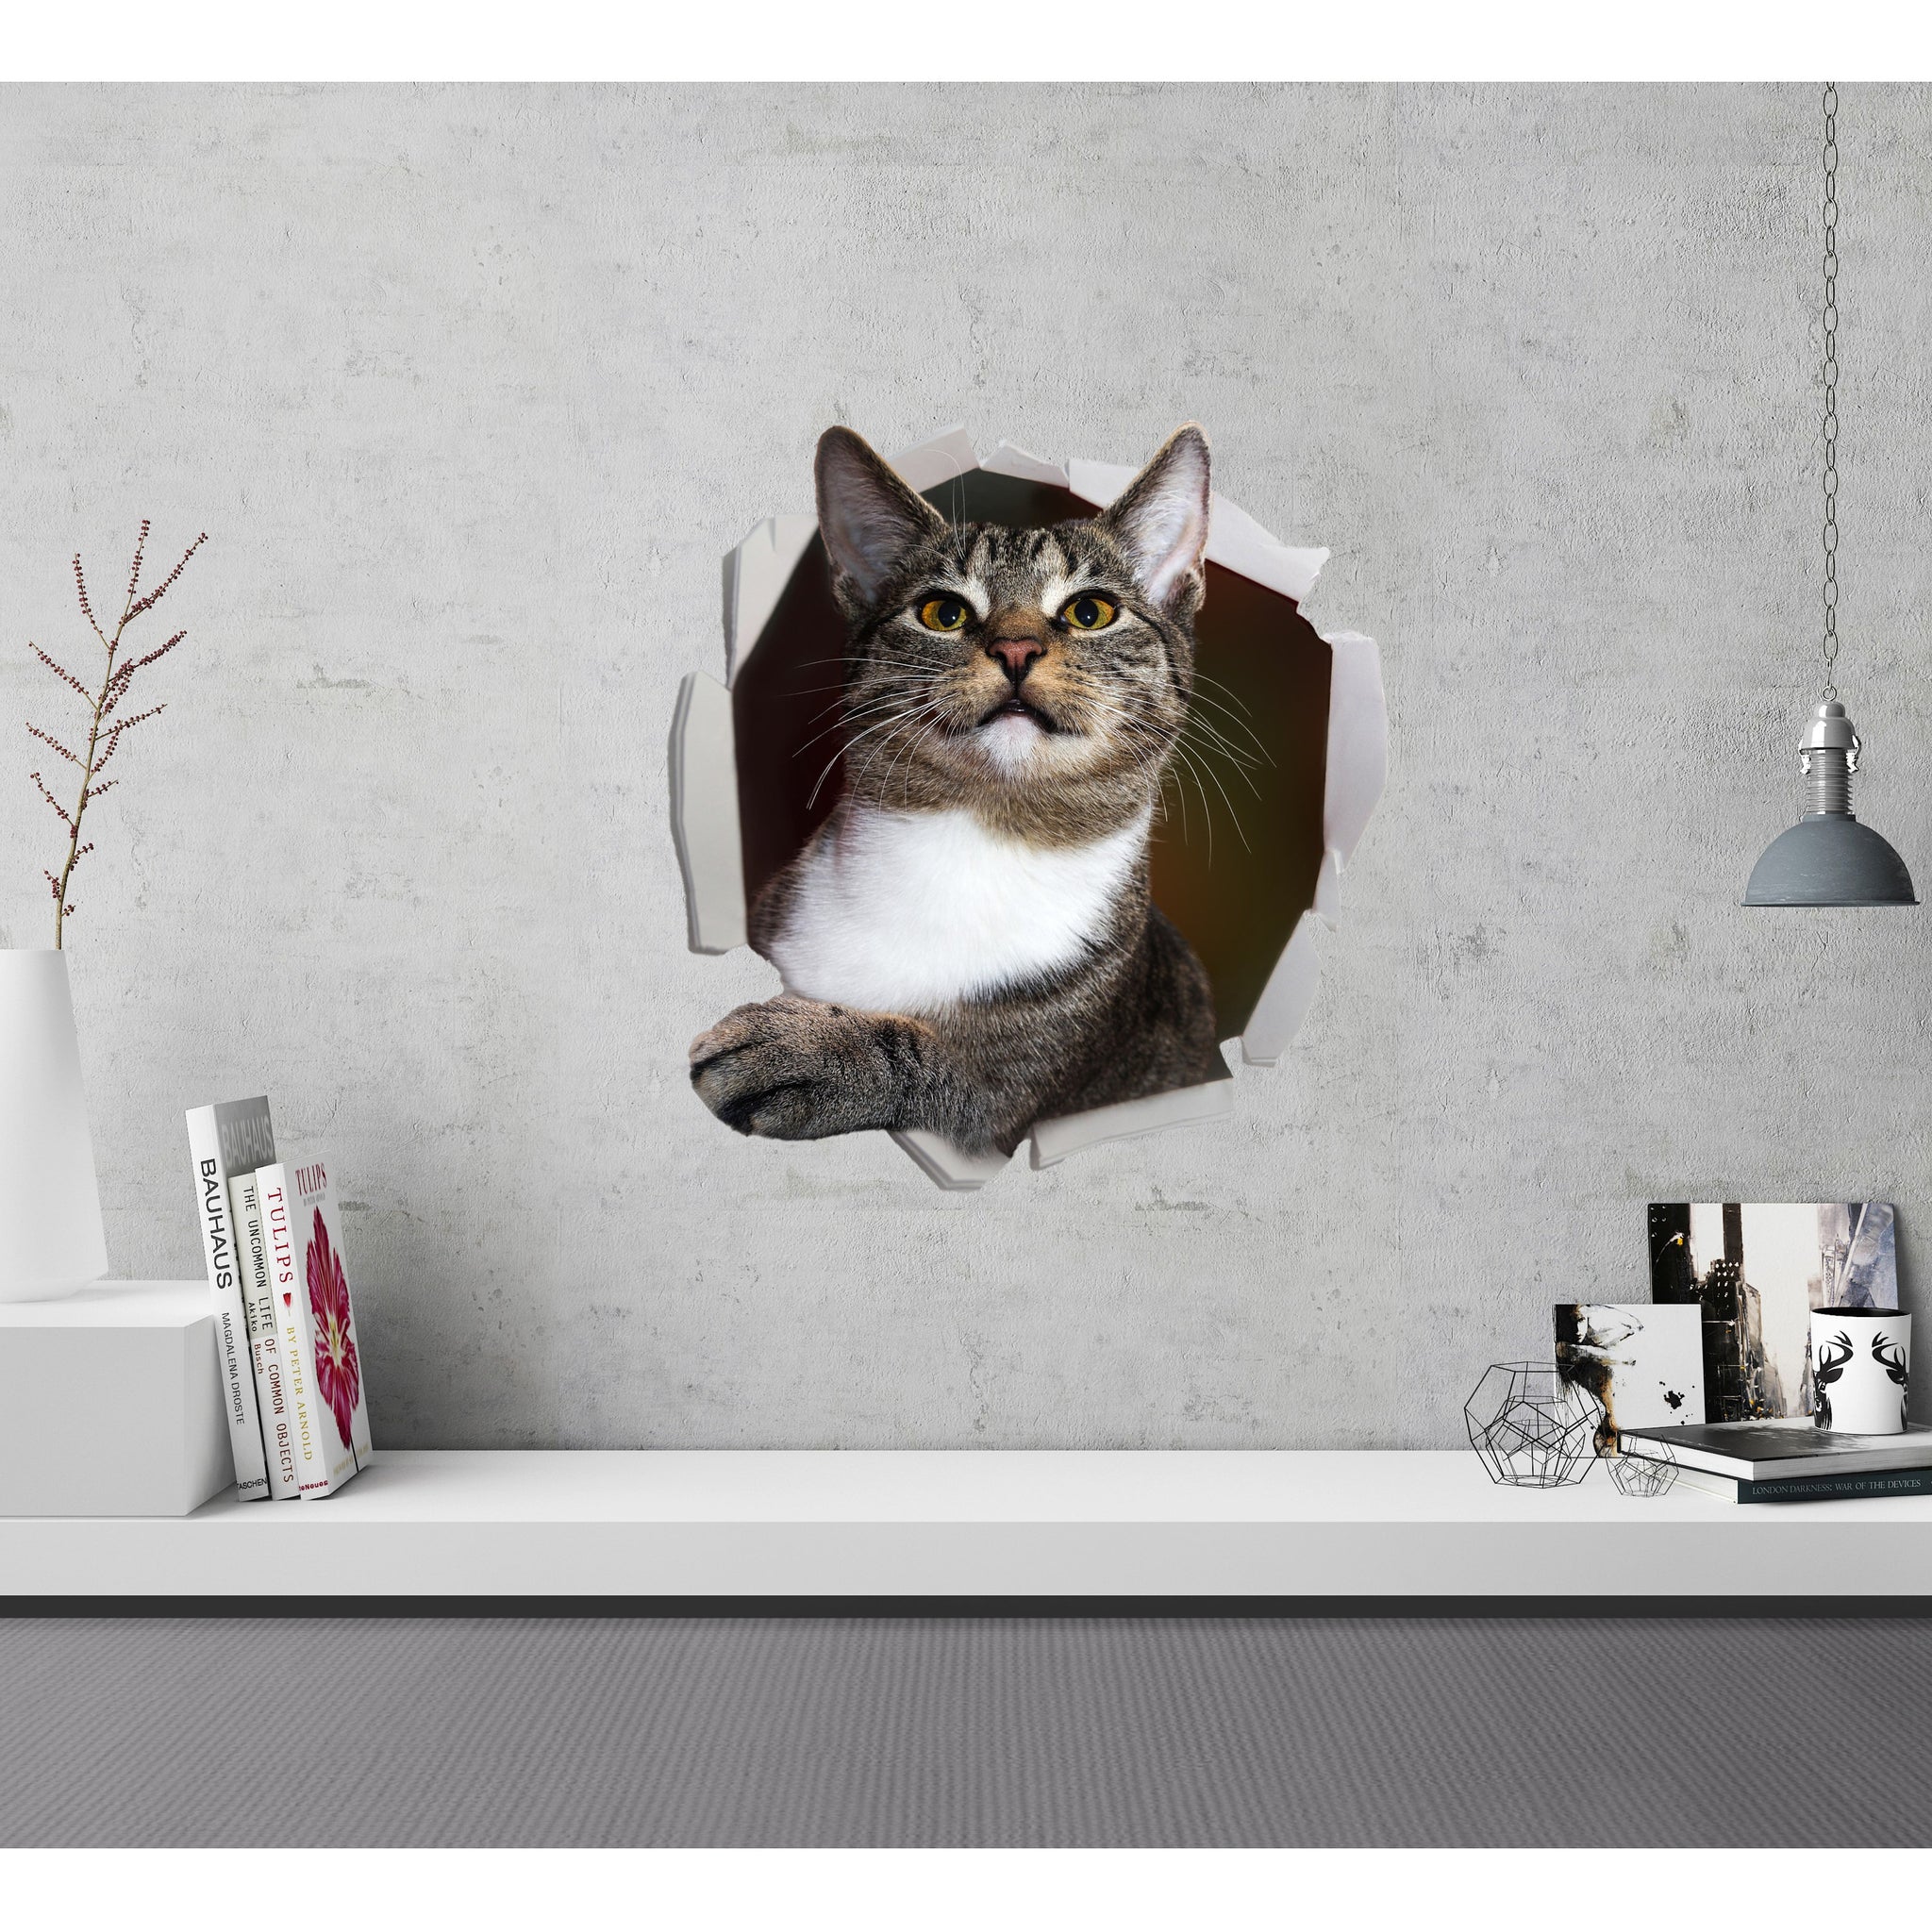 3D Wall Decal, Cat In Hole Decal, Funny Wall Sticker, Kids Room Decal, Wall Decal